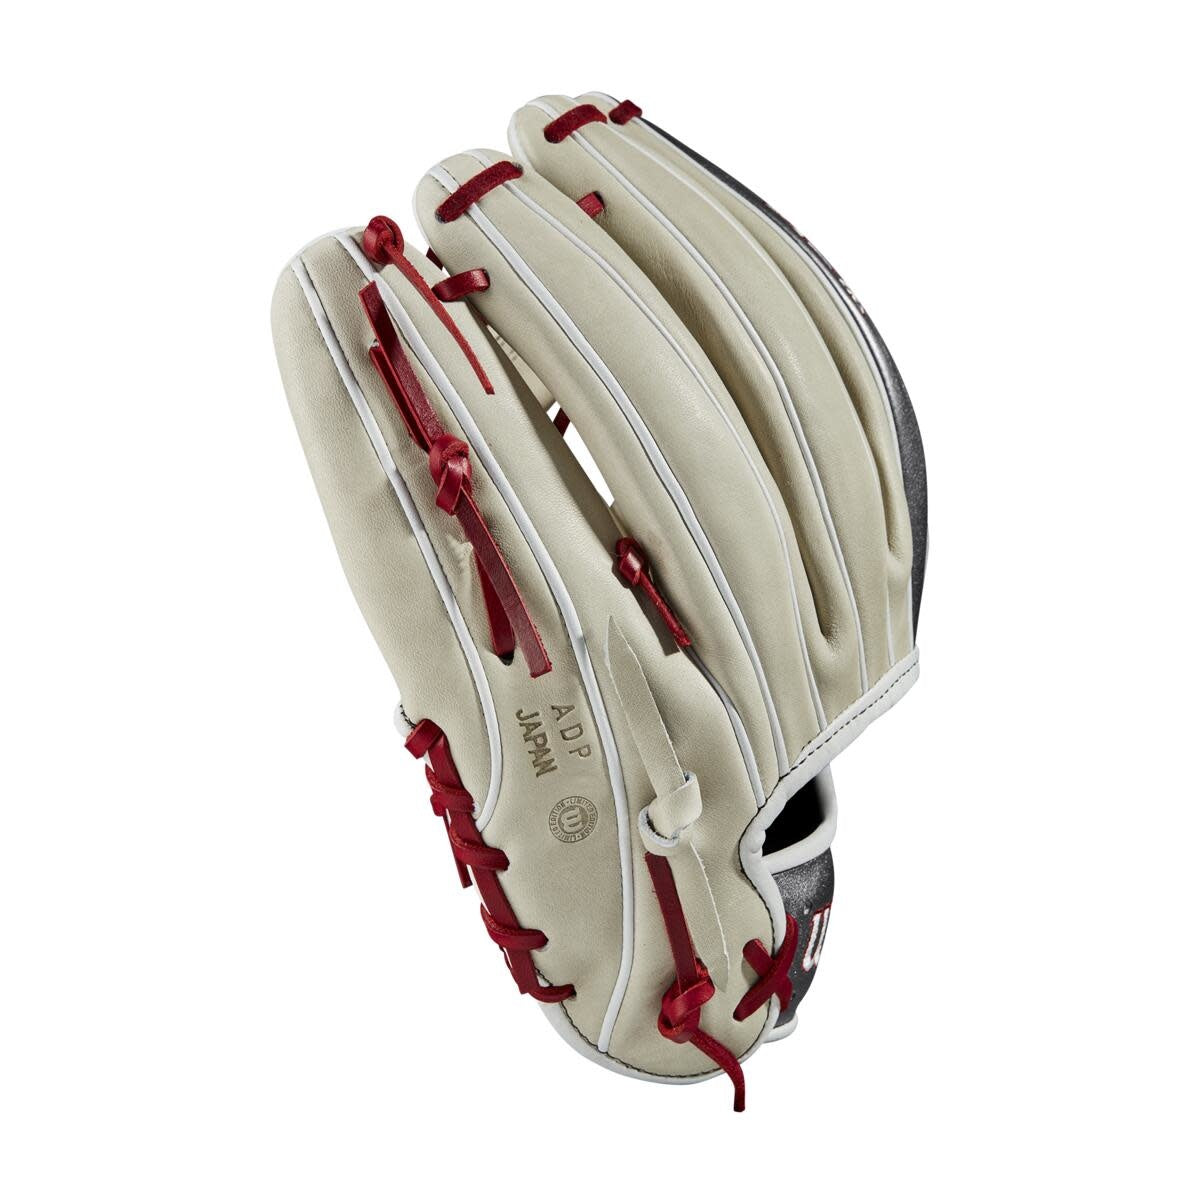 Wilson 2022 June Glove of the Month (GOTM) A2K 1787 Silver/Re